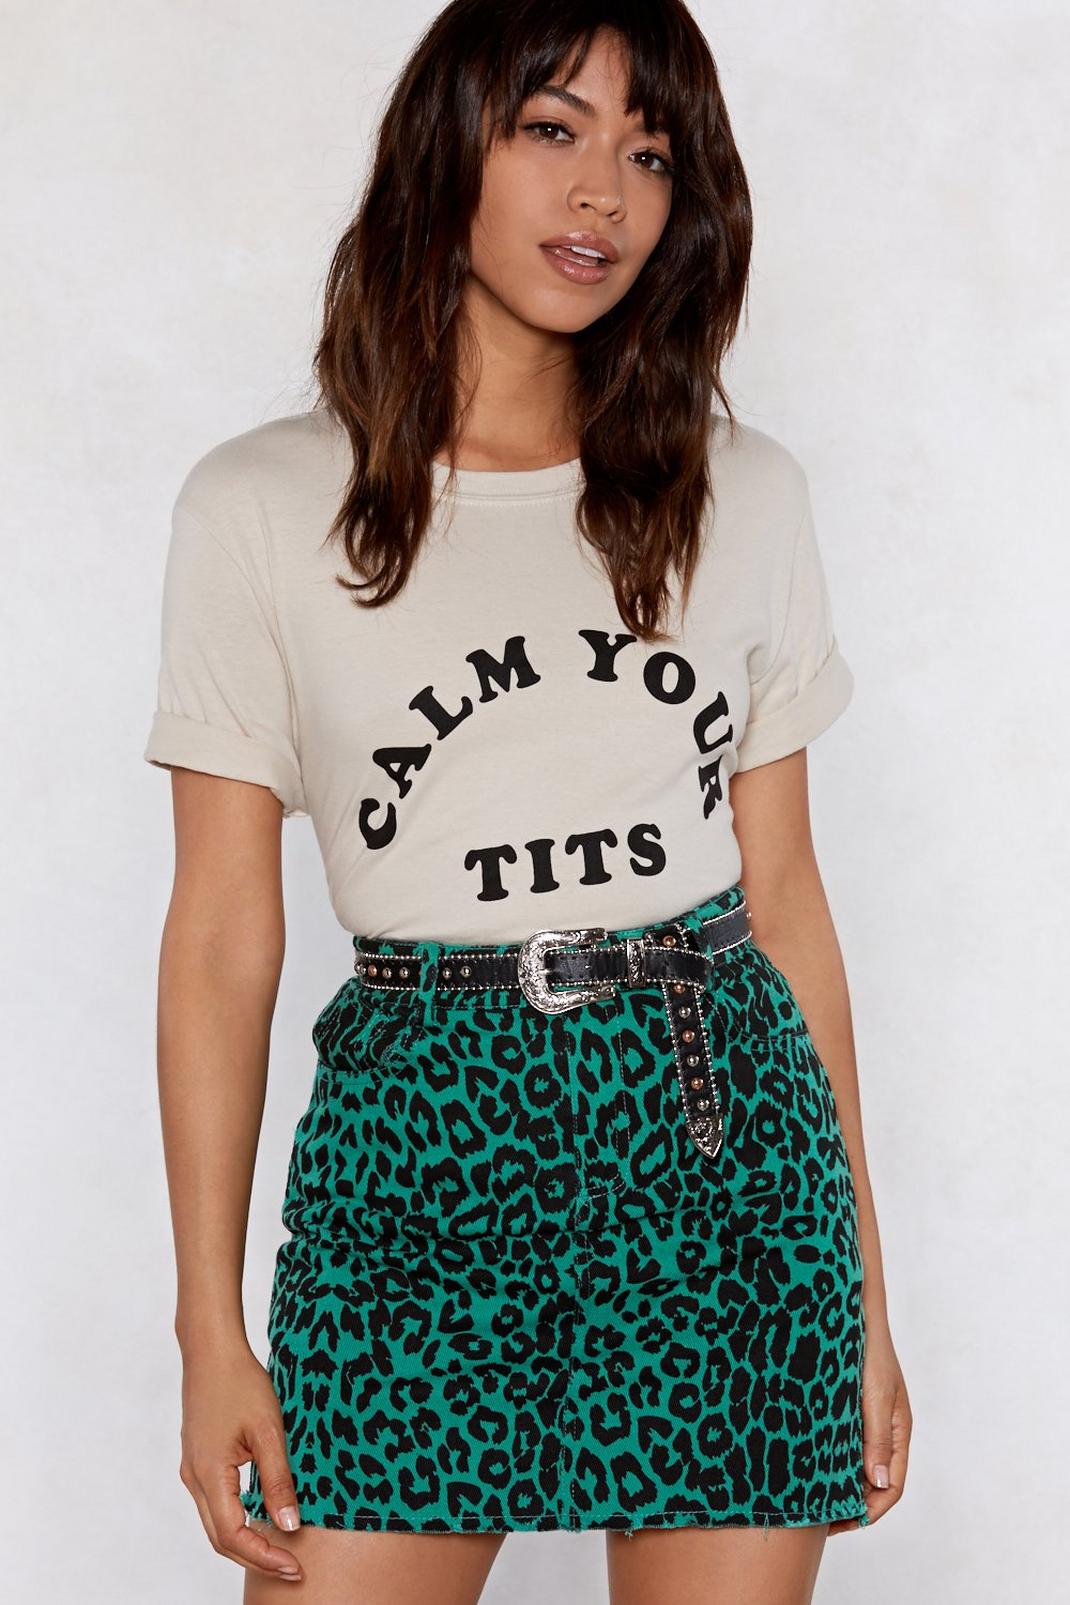 Calm Your Tits Tee | Nasty Gal